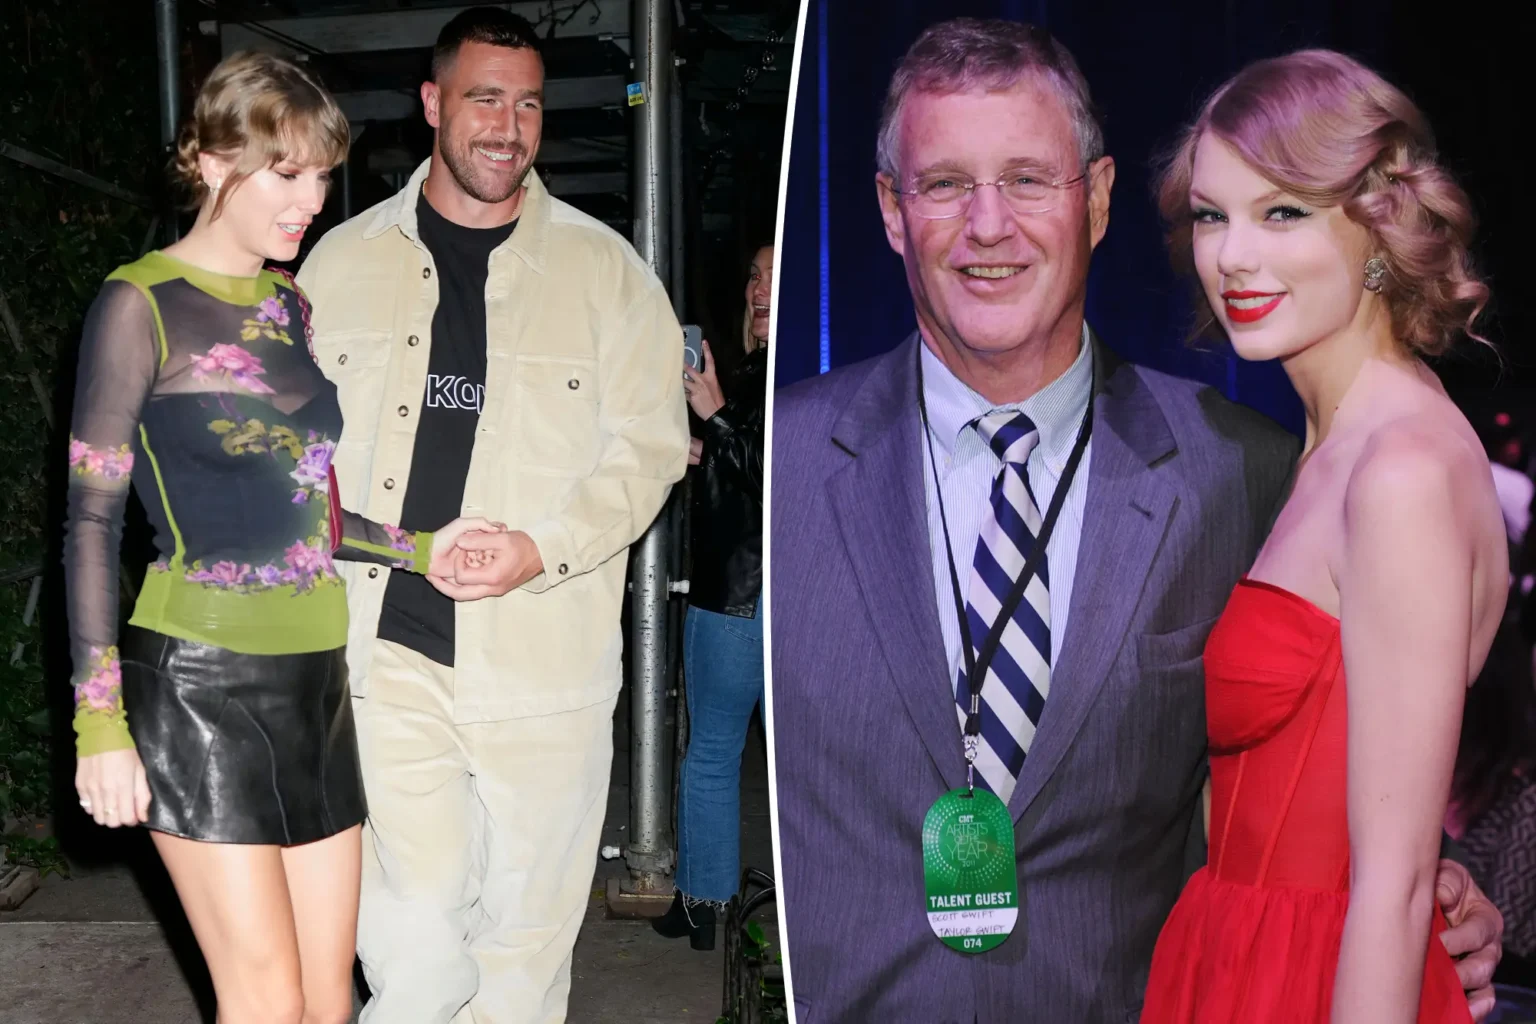 scott-swift-didnt-want-her-daughter-taylor-swift-to-date-musicians-ed-kelce-claims